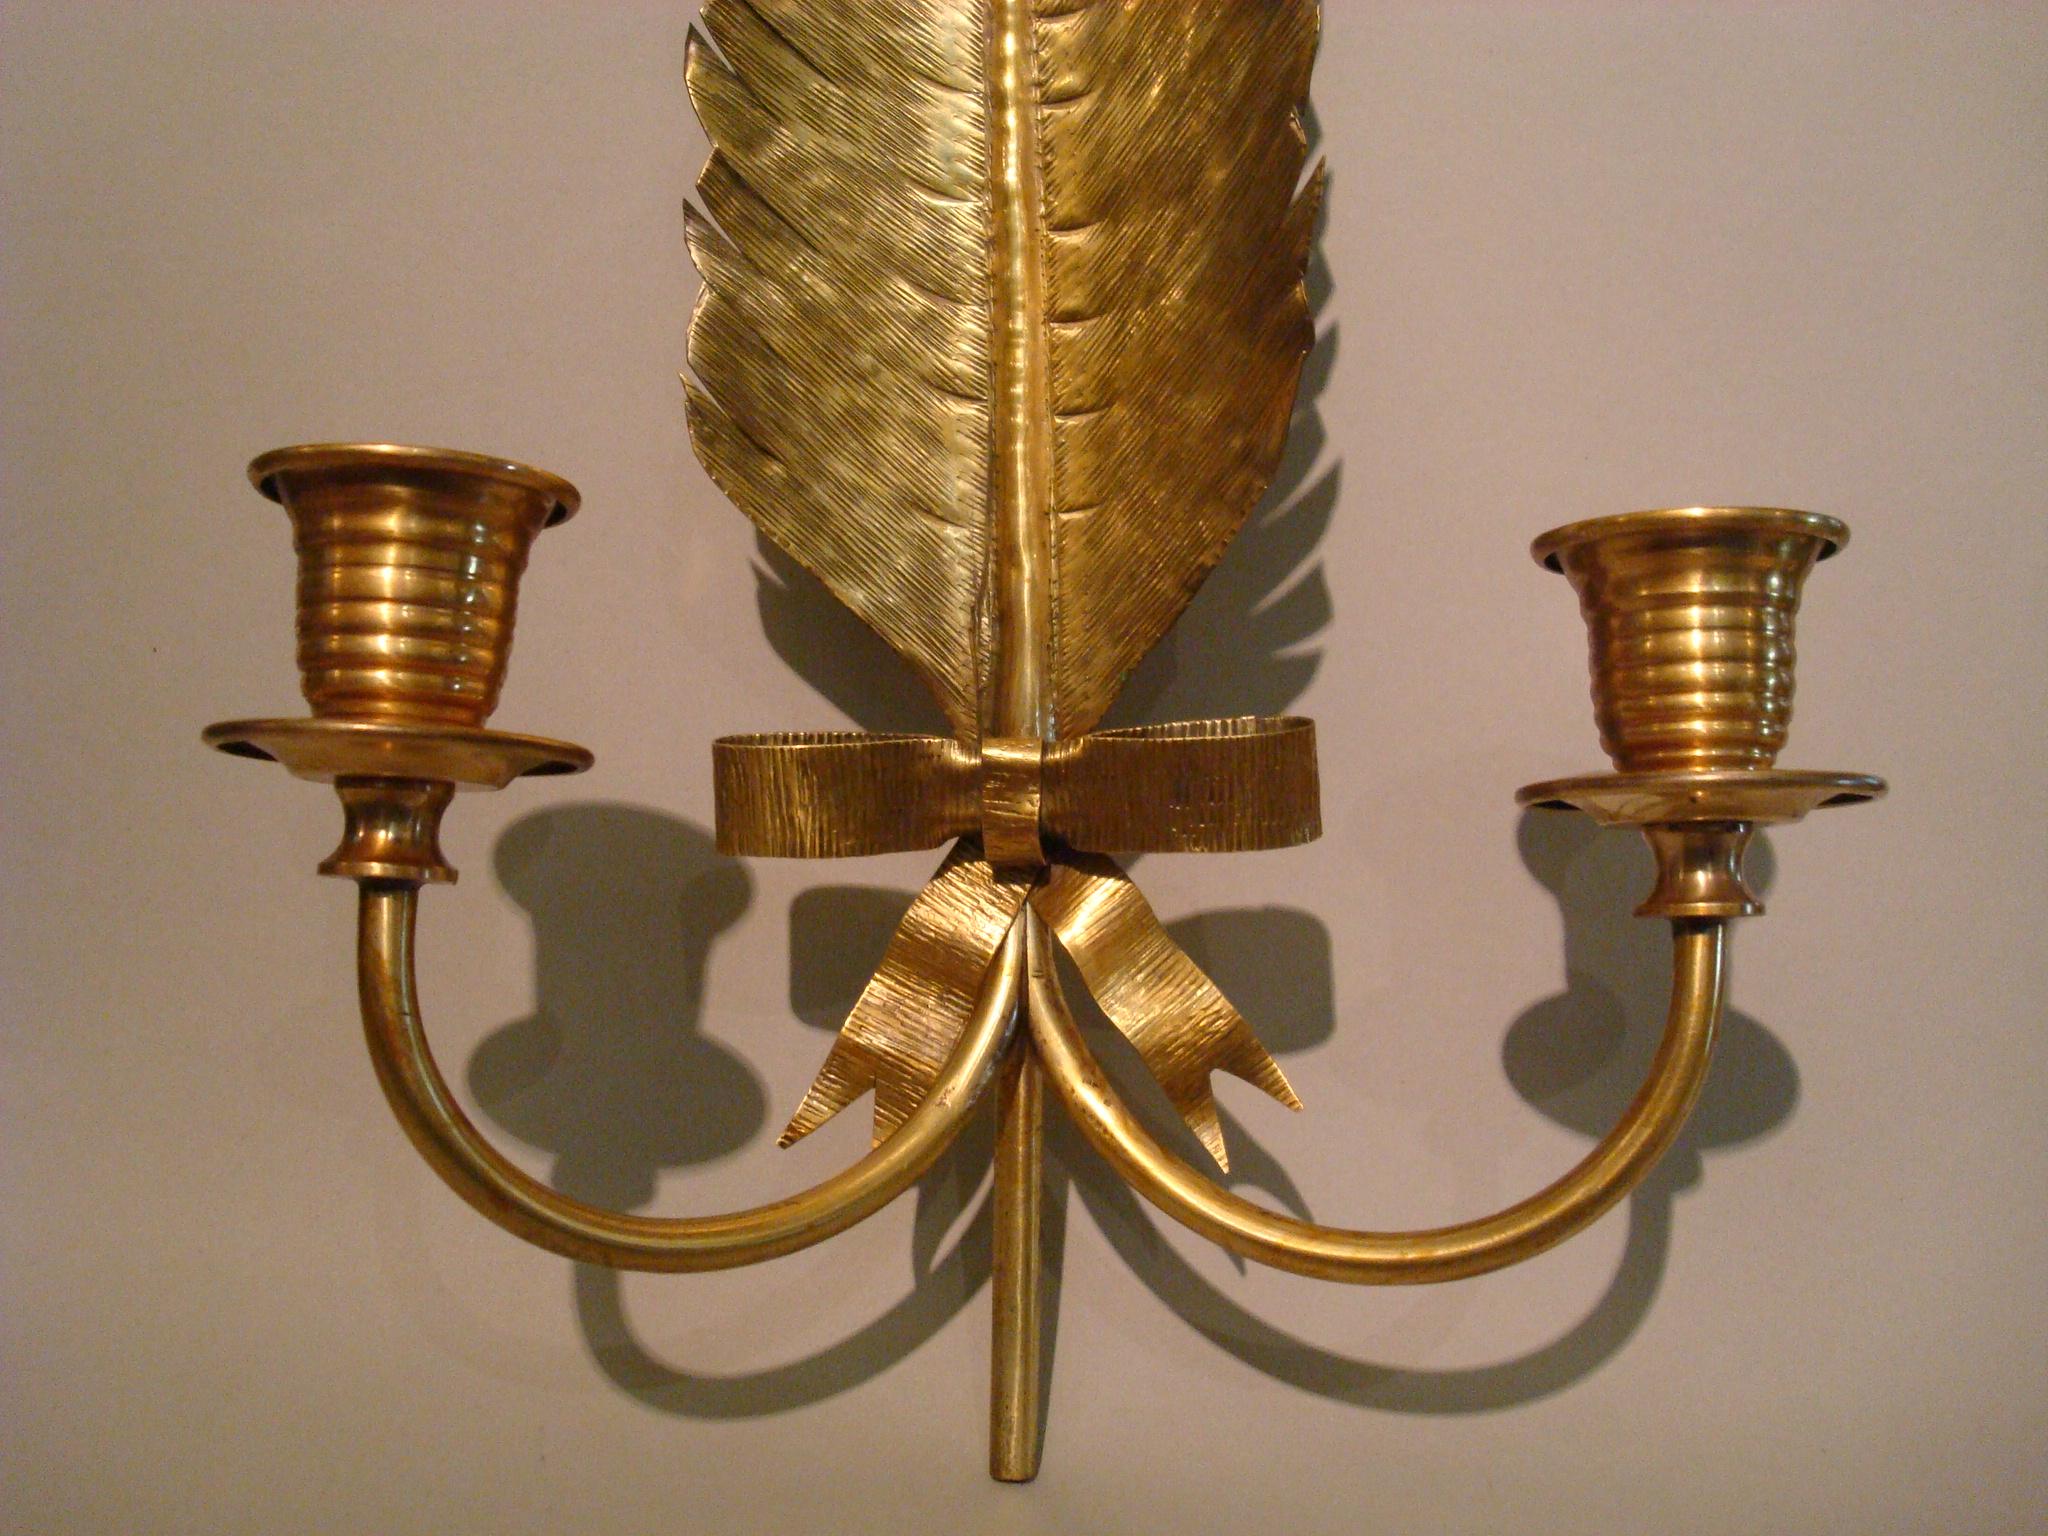 A stylish pair of gilt sconces attributed to Maison Jansen brass sconces in feather form with ribbons. Two lights. Original condition.